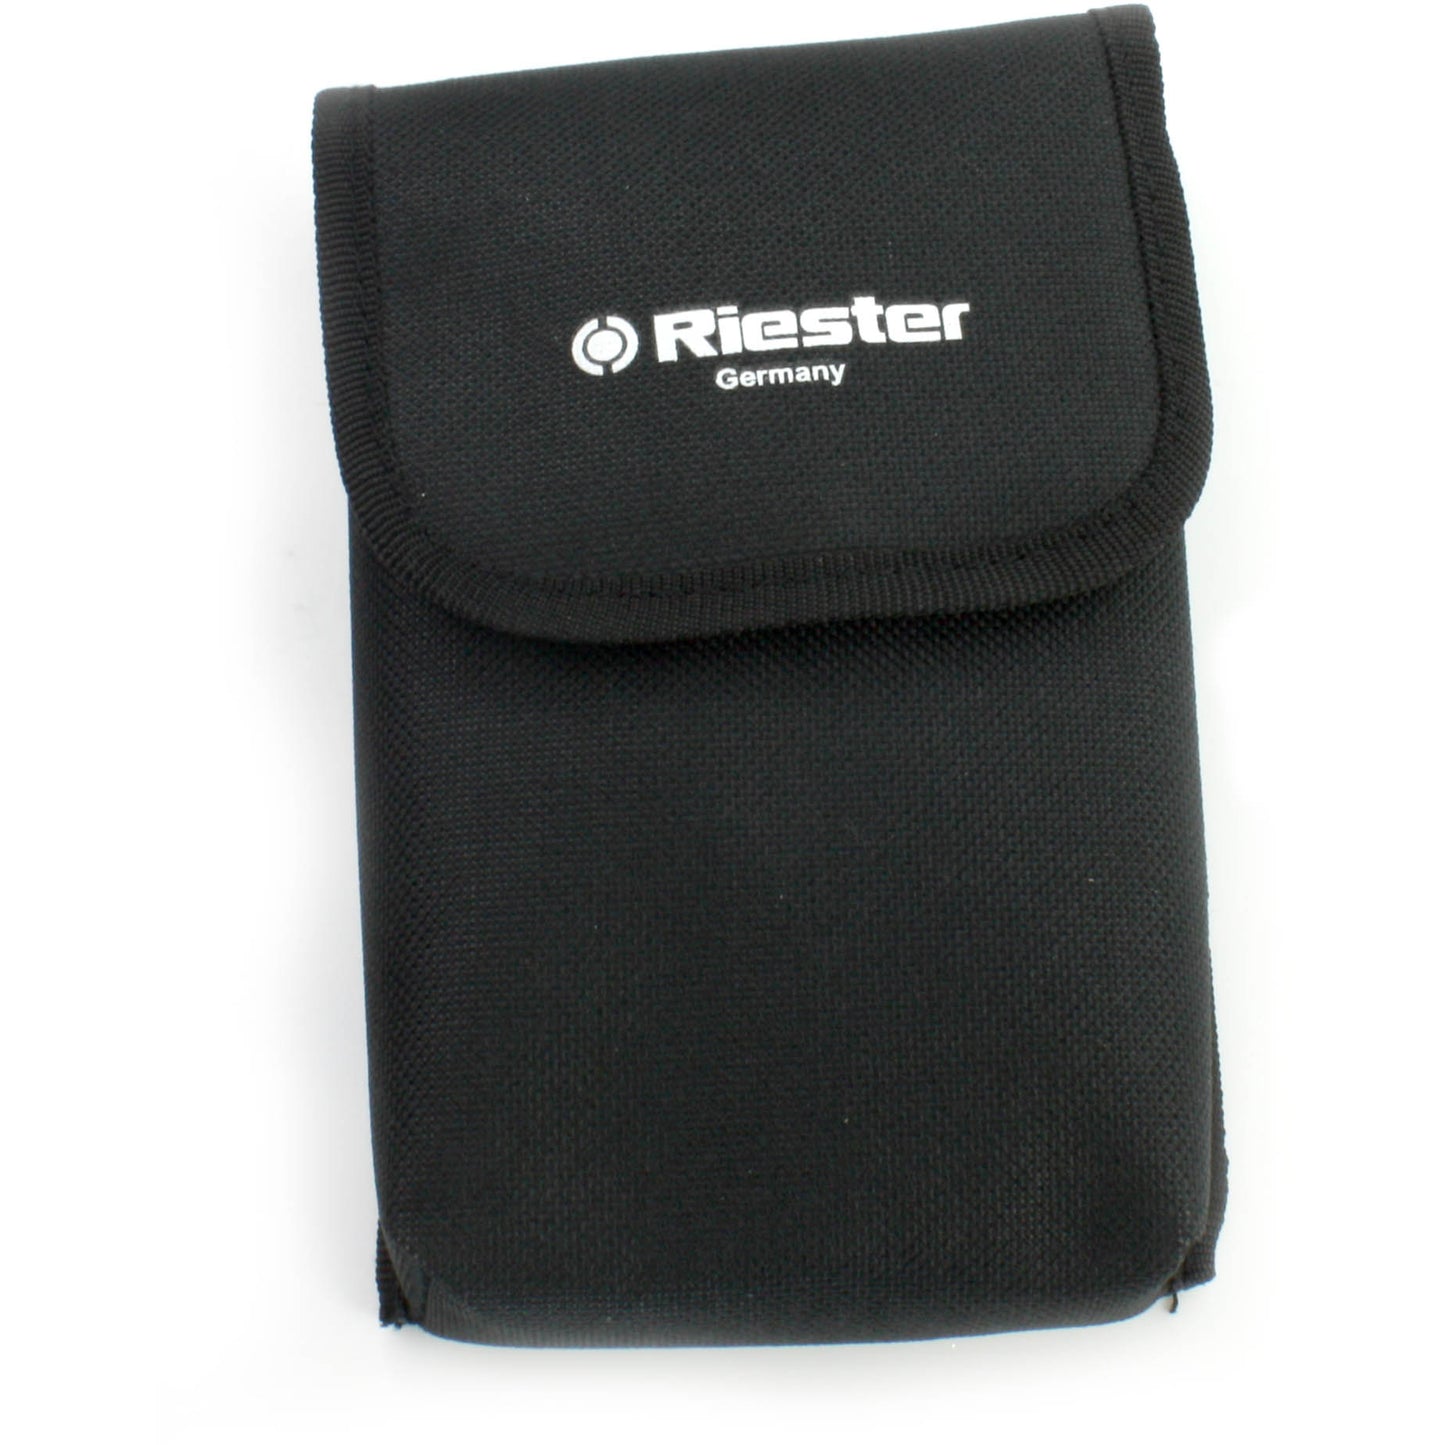 Riester Penscope Diagnostic Set 2.7v with Pouch - Black